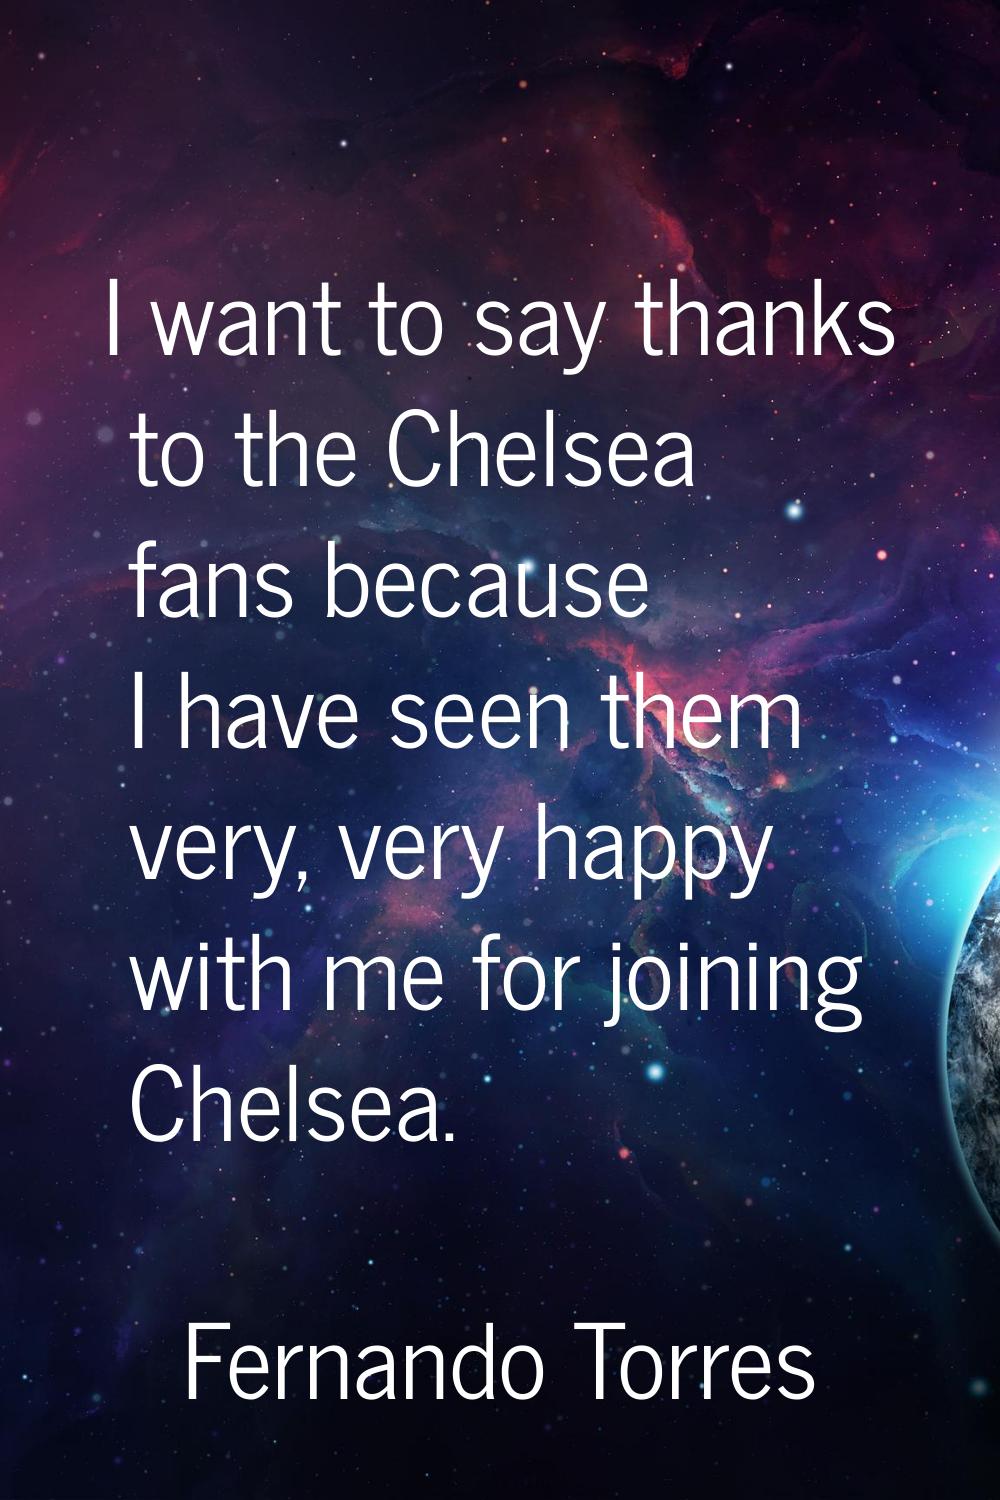 I want to say thanks to the Chelsea fans because I have seen them very, very happy with me for join